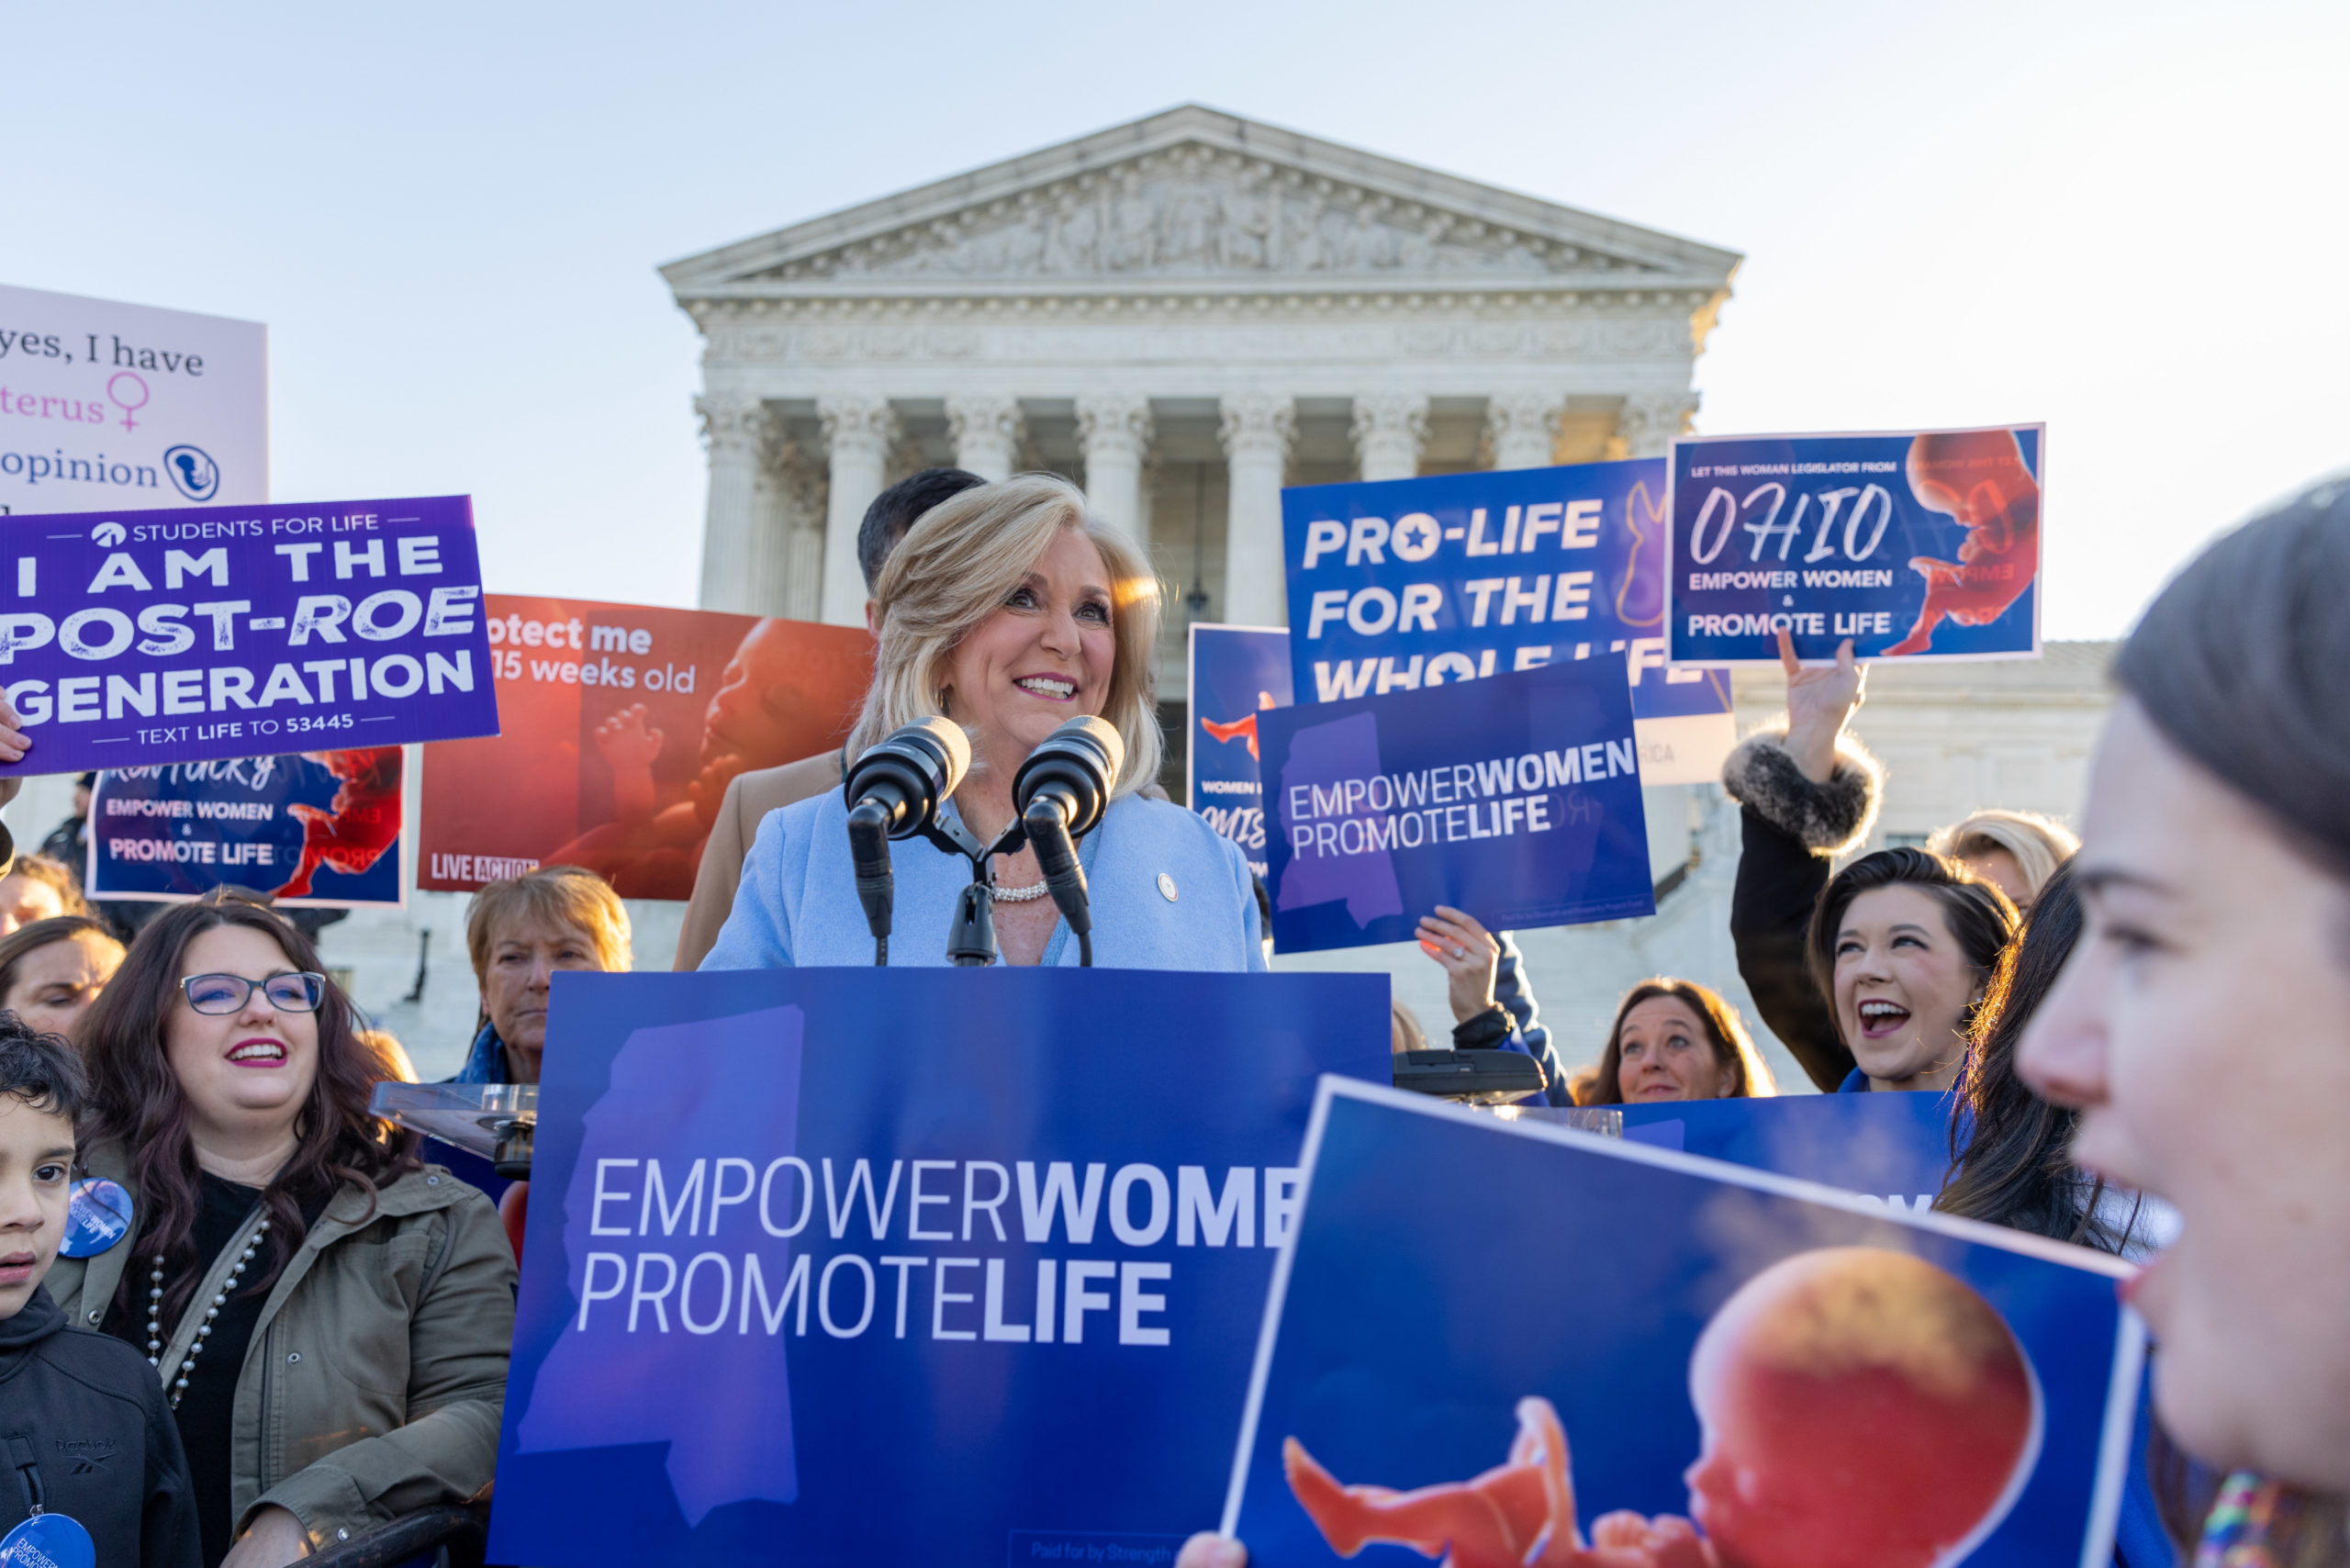 Empower Women Promote Life Highlight Video